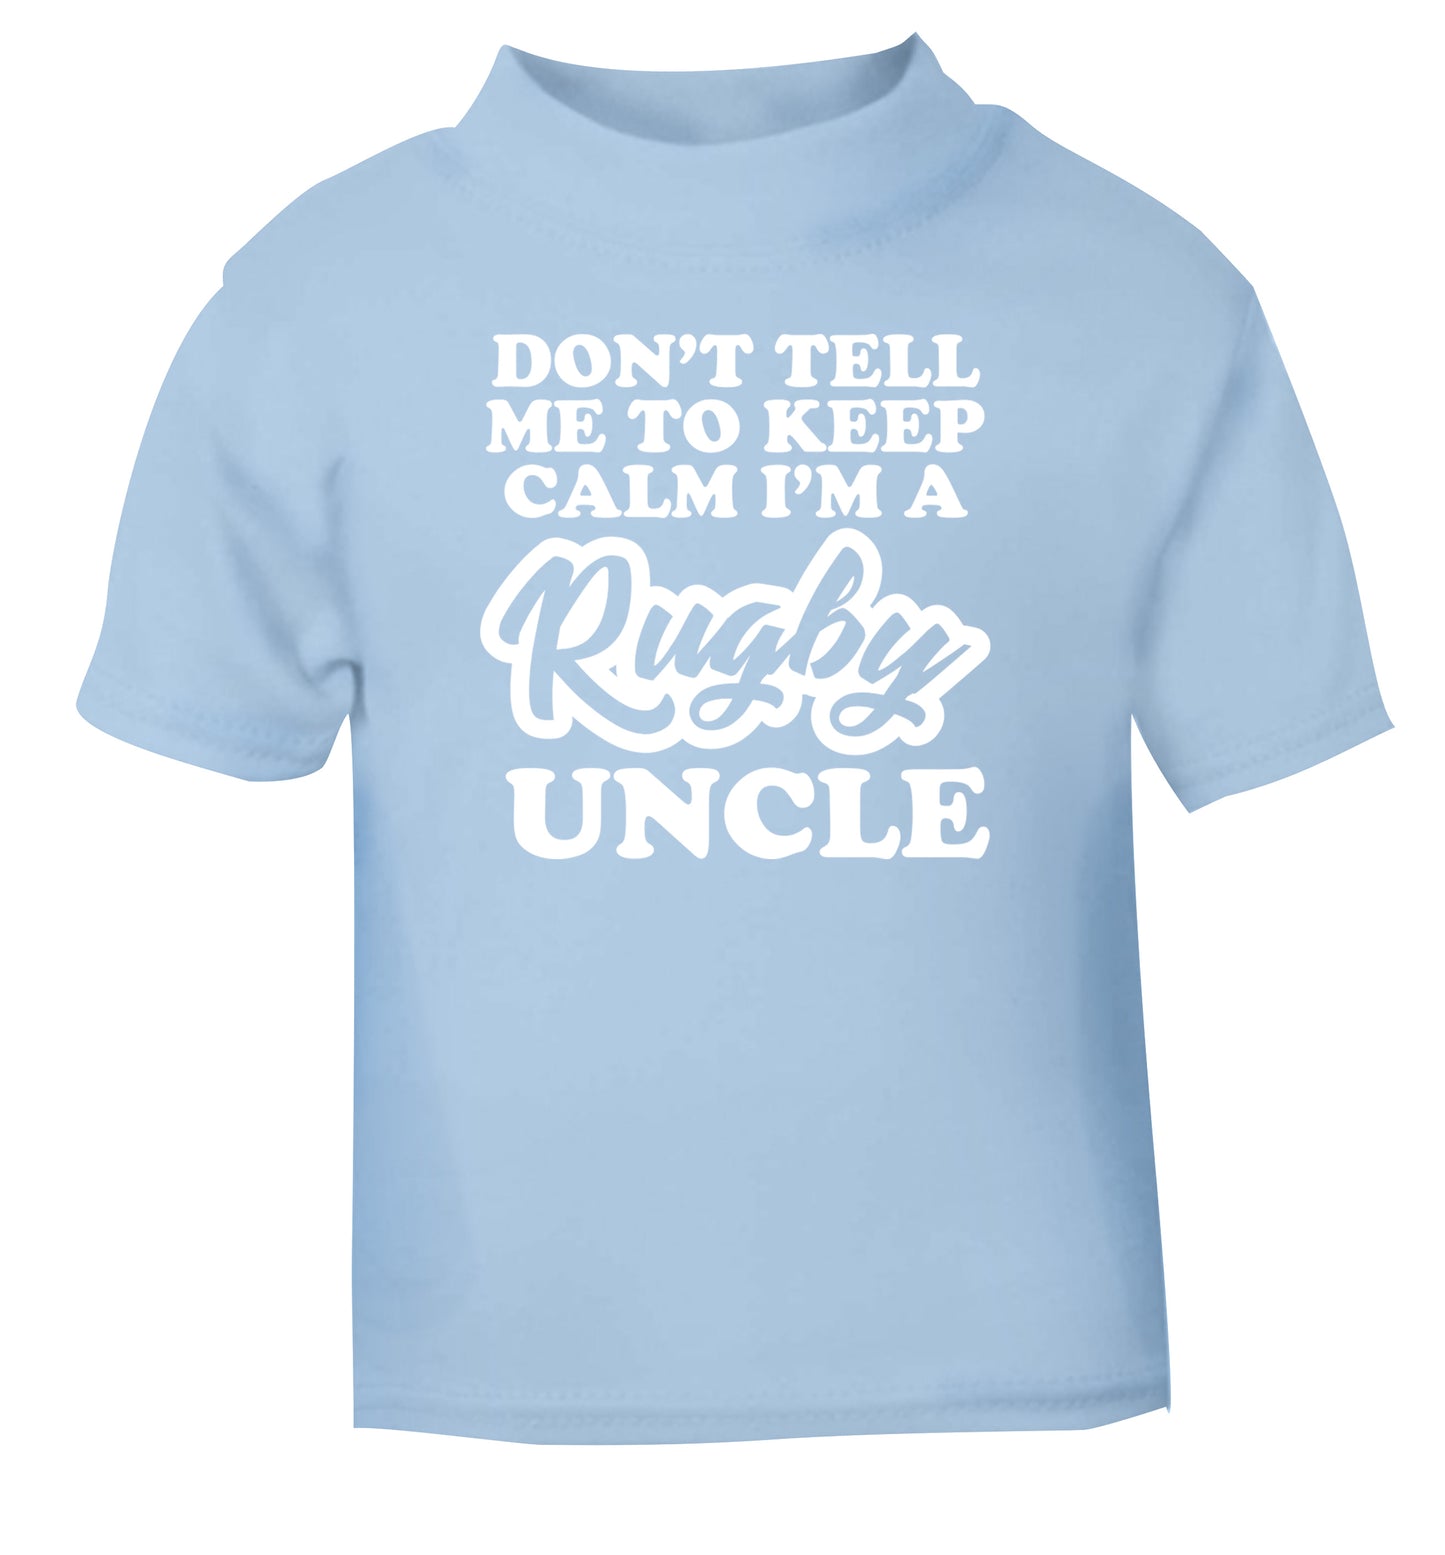 Don't tell me to keep calm I'm a rugby uncle light blue Baby Toddler Tshirt 2 Years